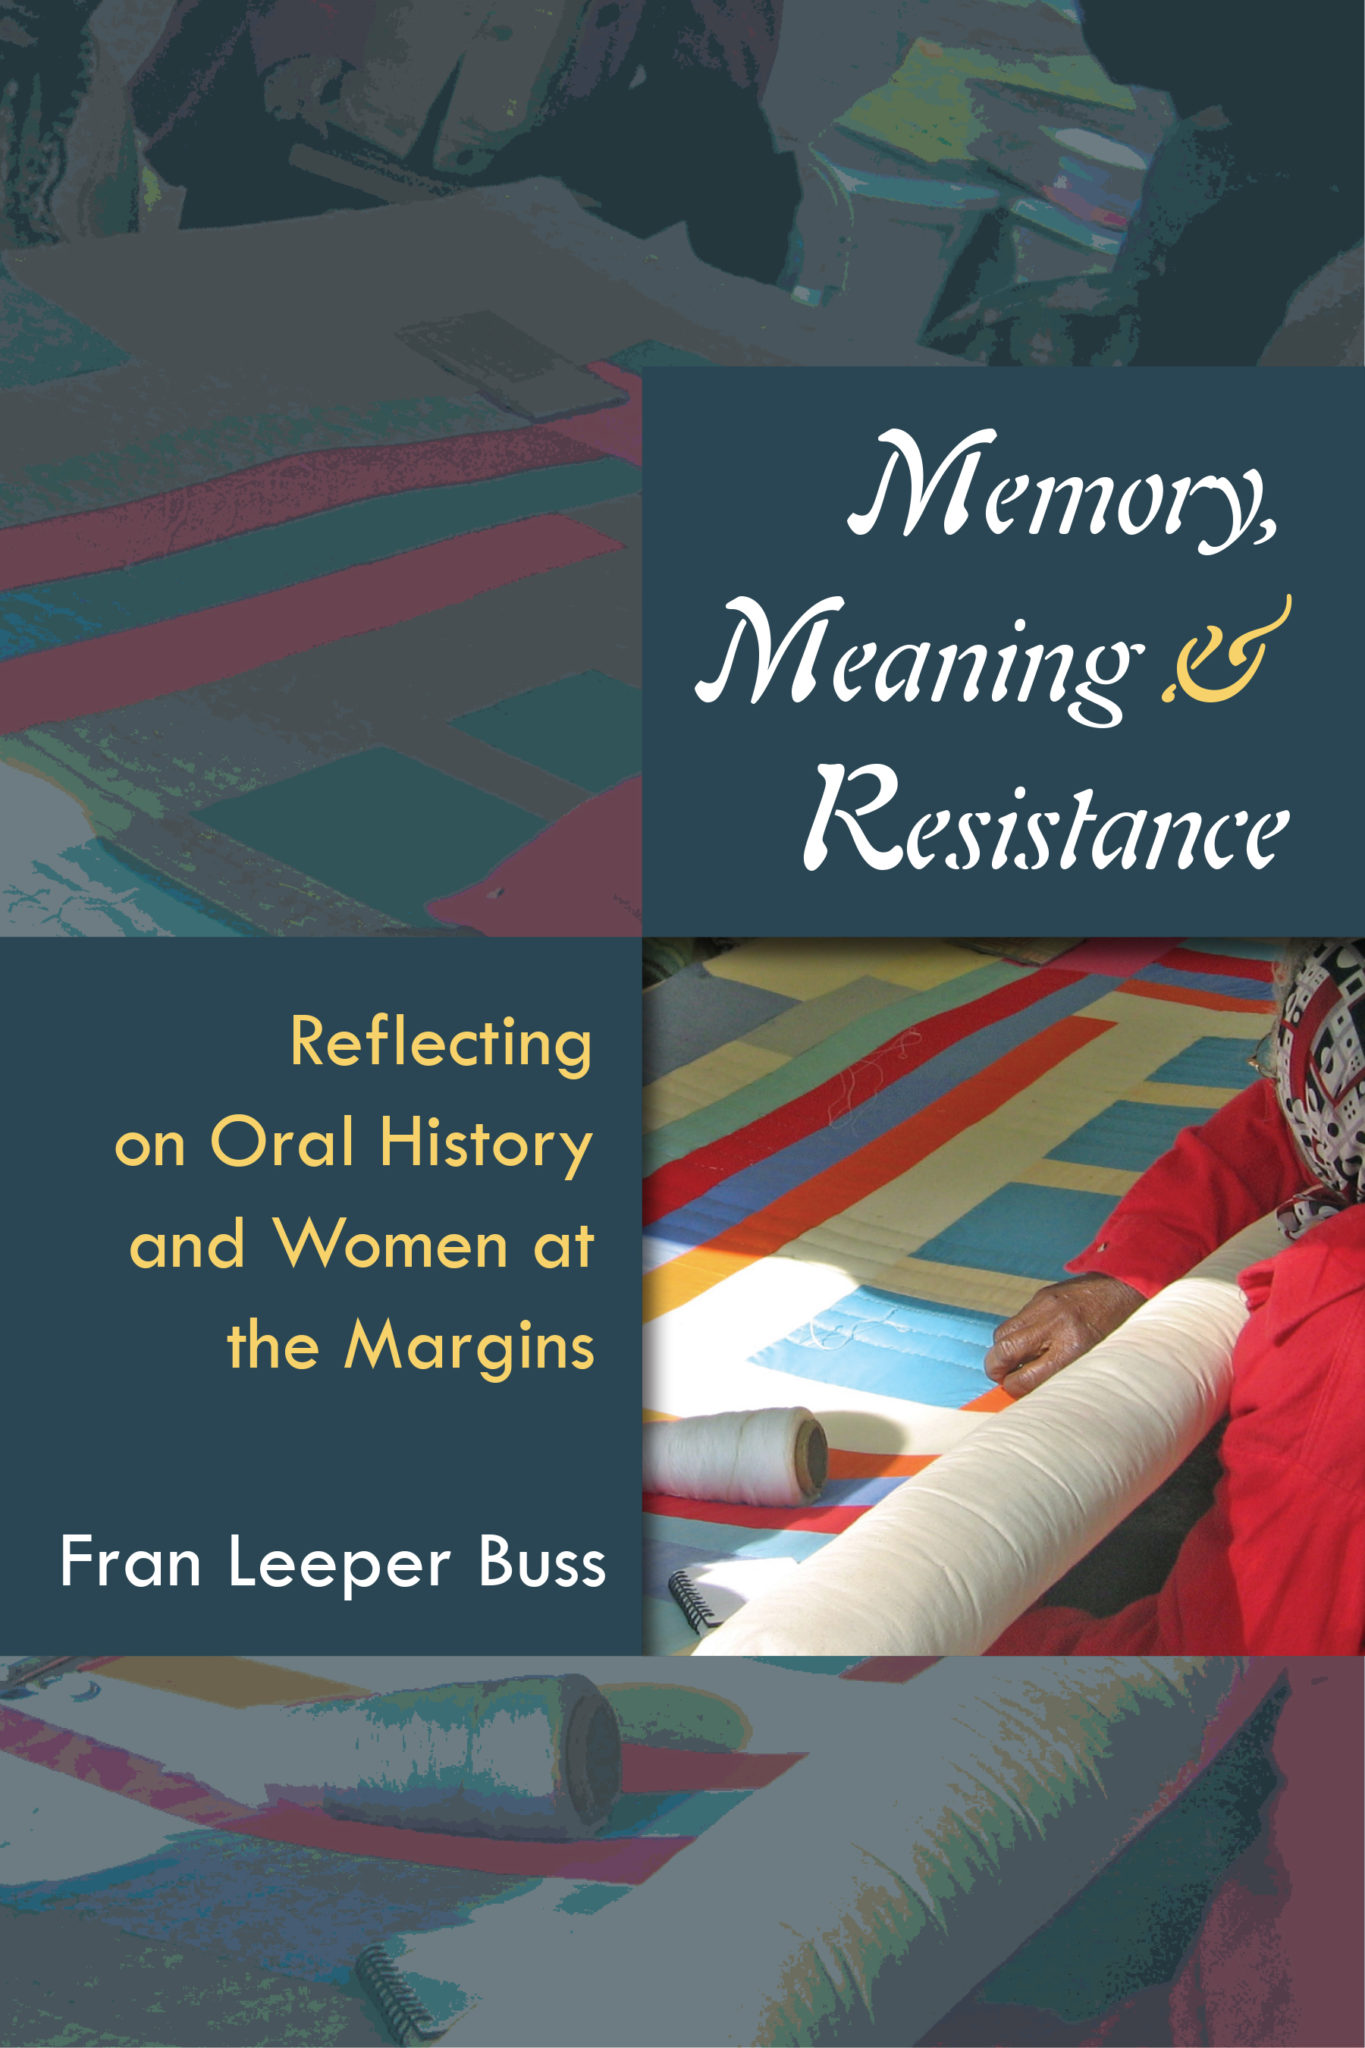 Jacket of Fran Leeper Buss' book Memory, Meaning and Resistance